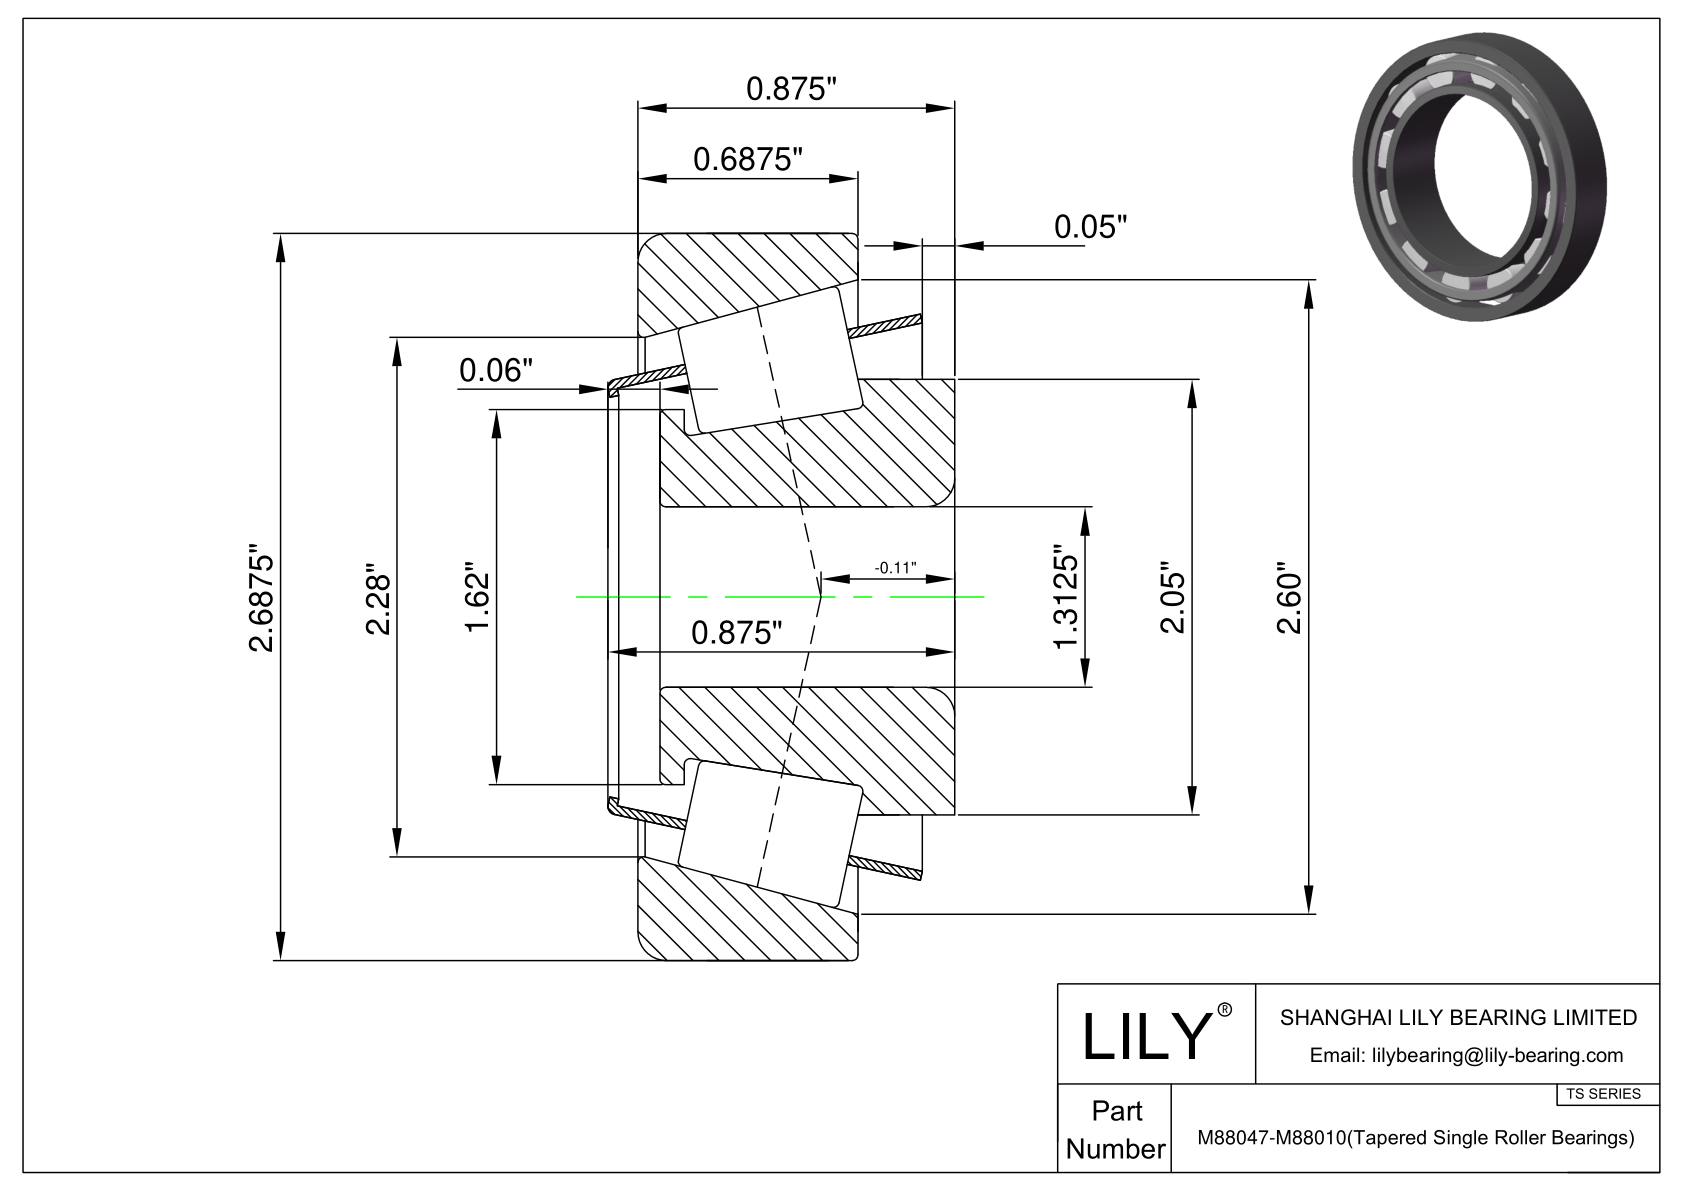 M88047-M88010 TS (Tapered Single Roller Bearings) (Imperial) cad drawing